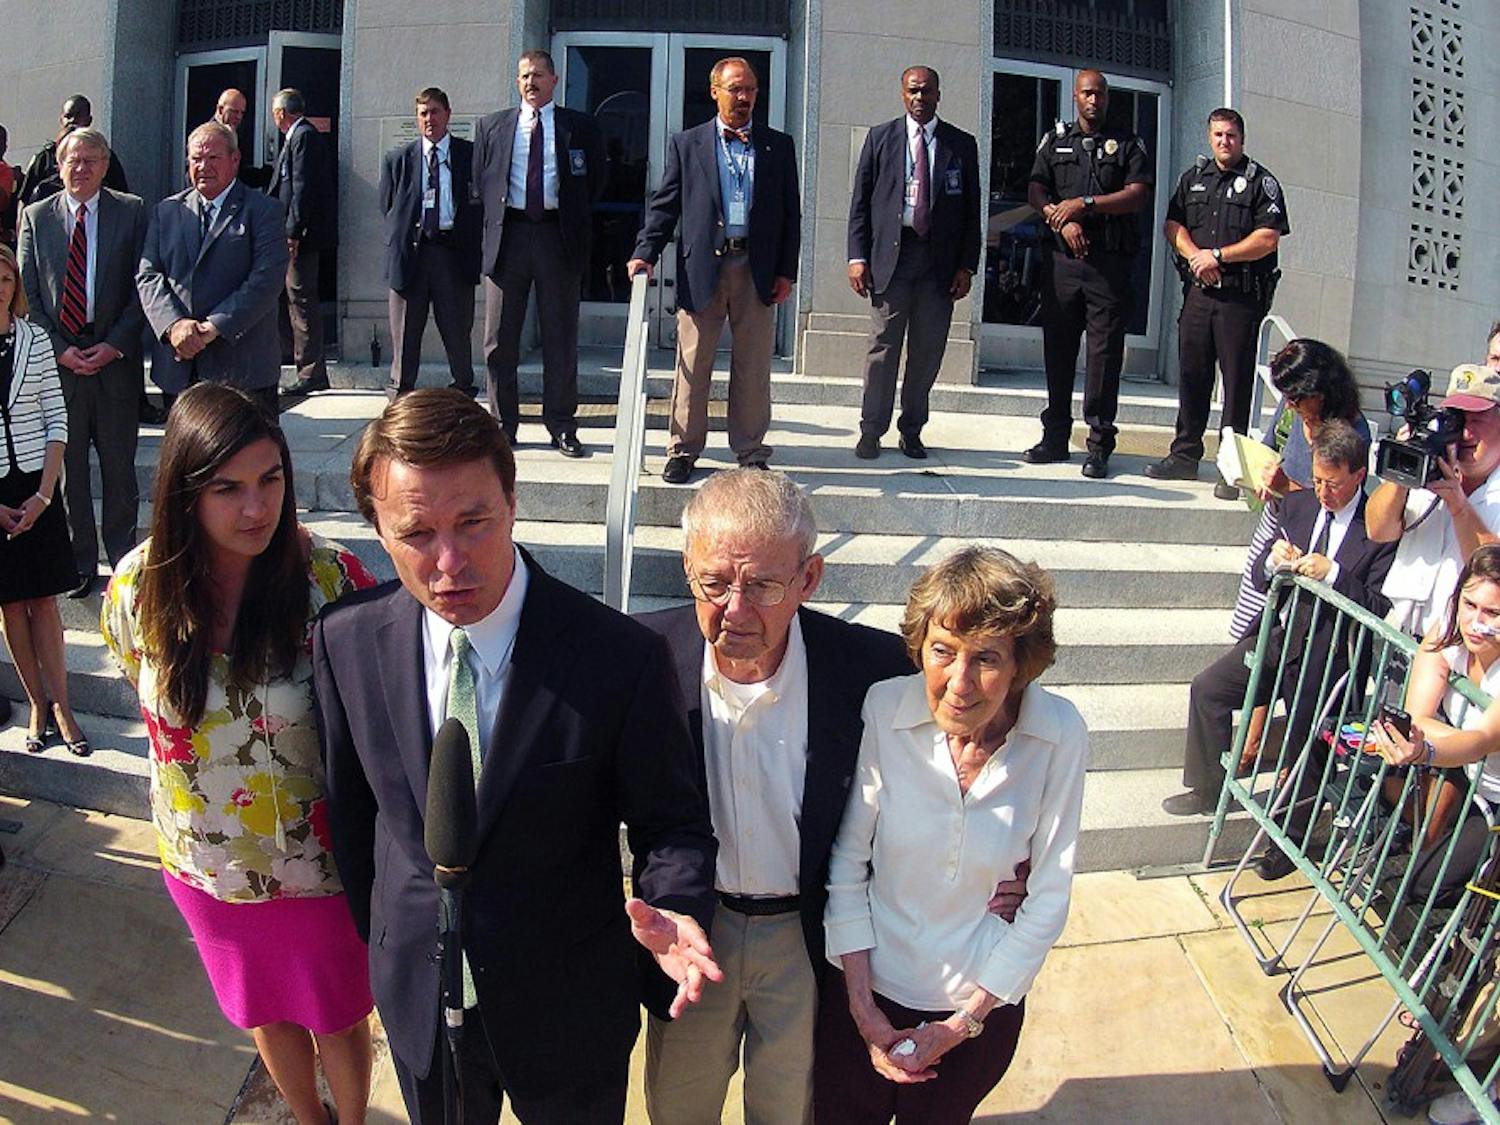 Former Sen. John Edwards speaks to the media in front of the federal courthouse in Greensboro, North Carolina, Thursday, May 31, 2012, with his family at the end of his trial. Edwards was found not guilty on one of six counts in his campaign finance trial and announced it could not agree on the five remaining counts. (Chucky Liddy/Raleigh News &amp; Observer/MCT)